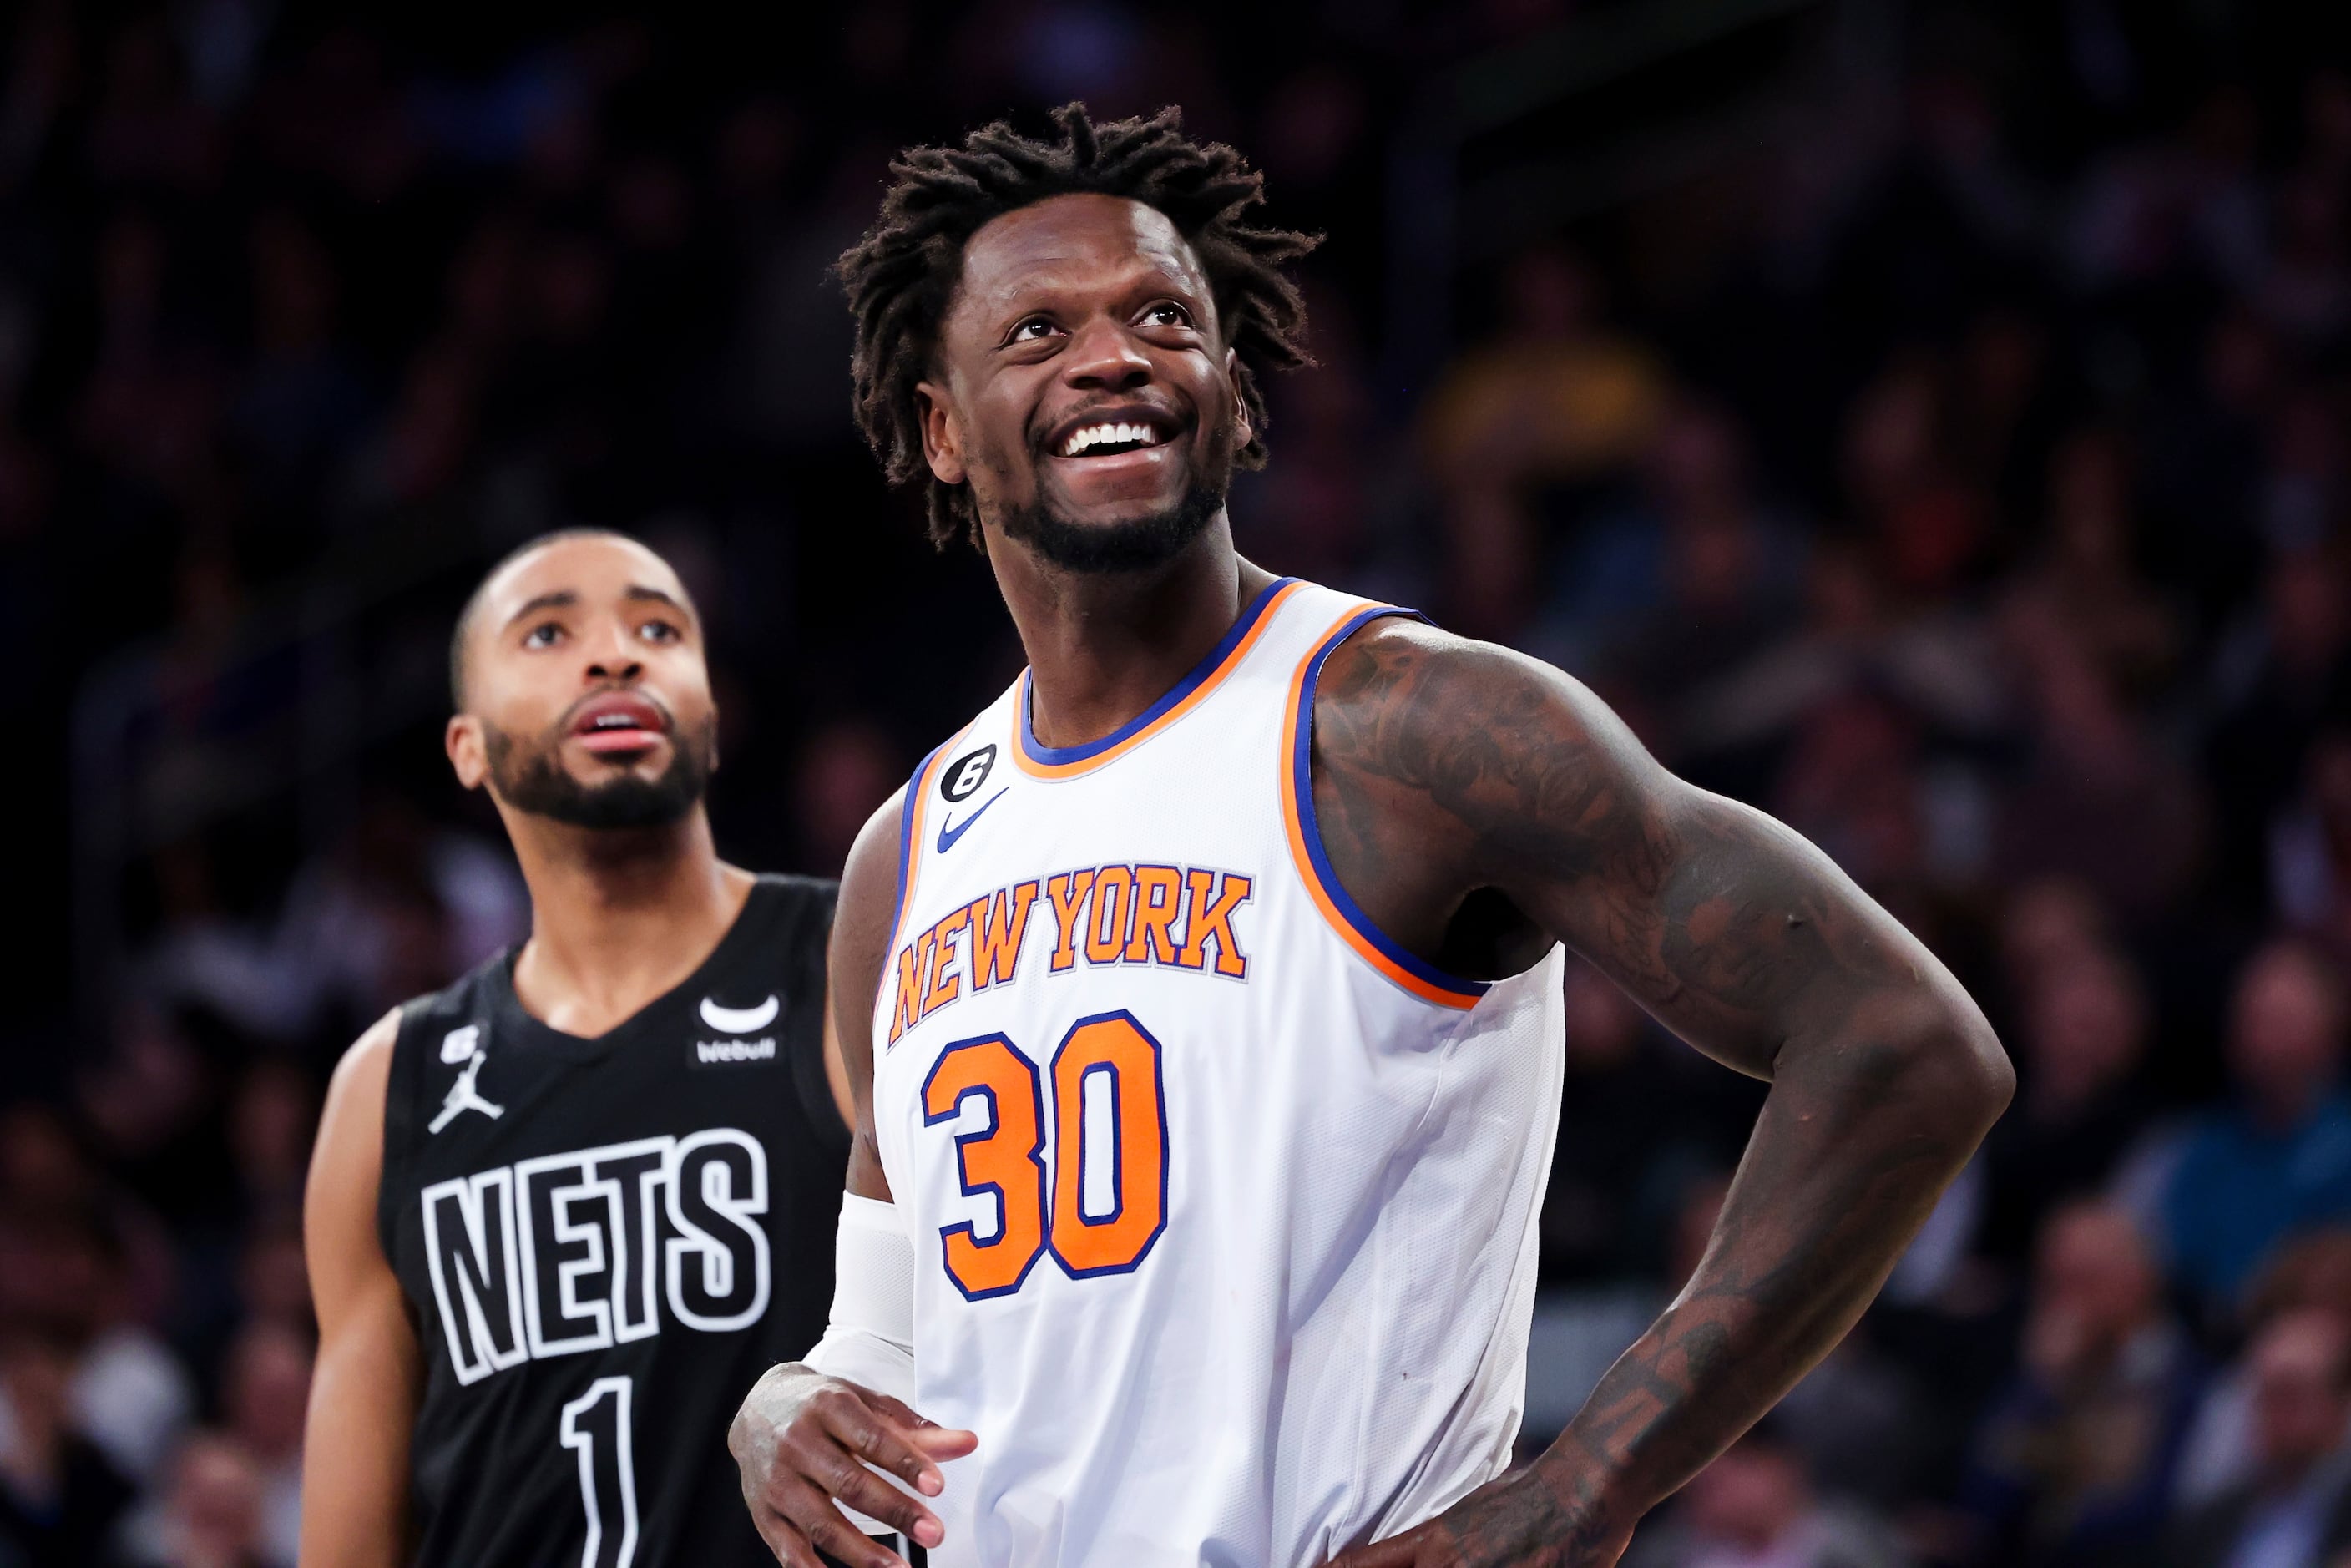 Julius Randle to participate in 3-point contest in Salt Lake City